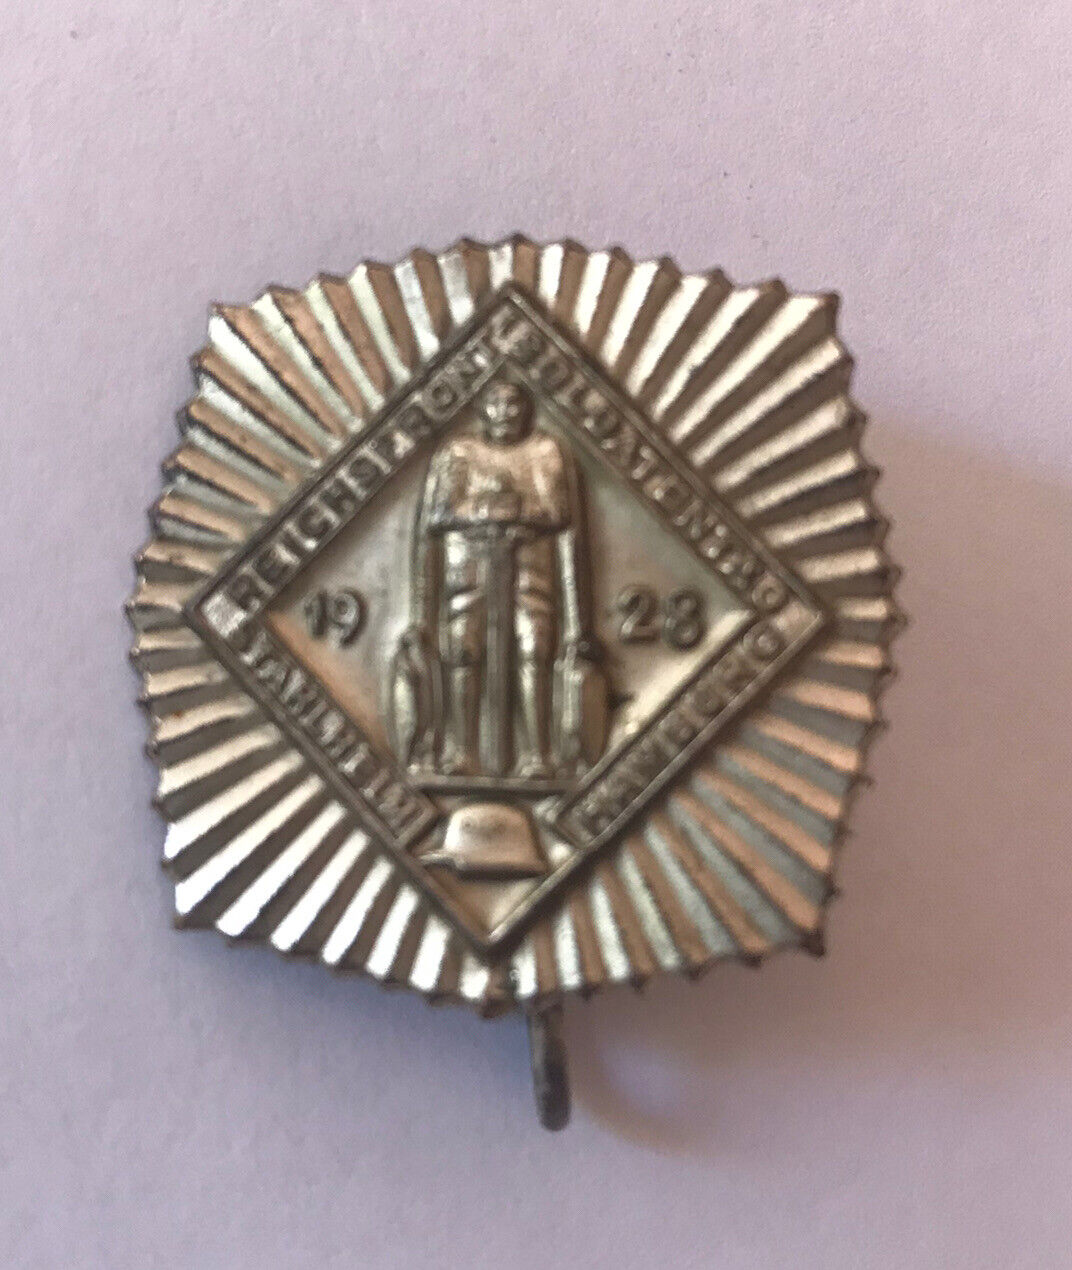 1928 Reichsfrontsoldatentag Tin Badge Pin Post WWI Collectible German Military